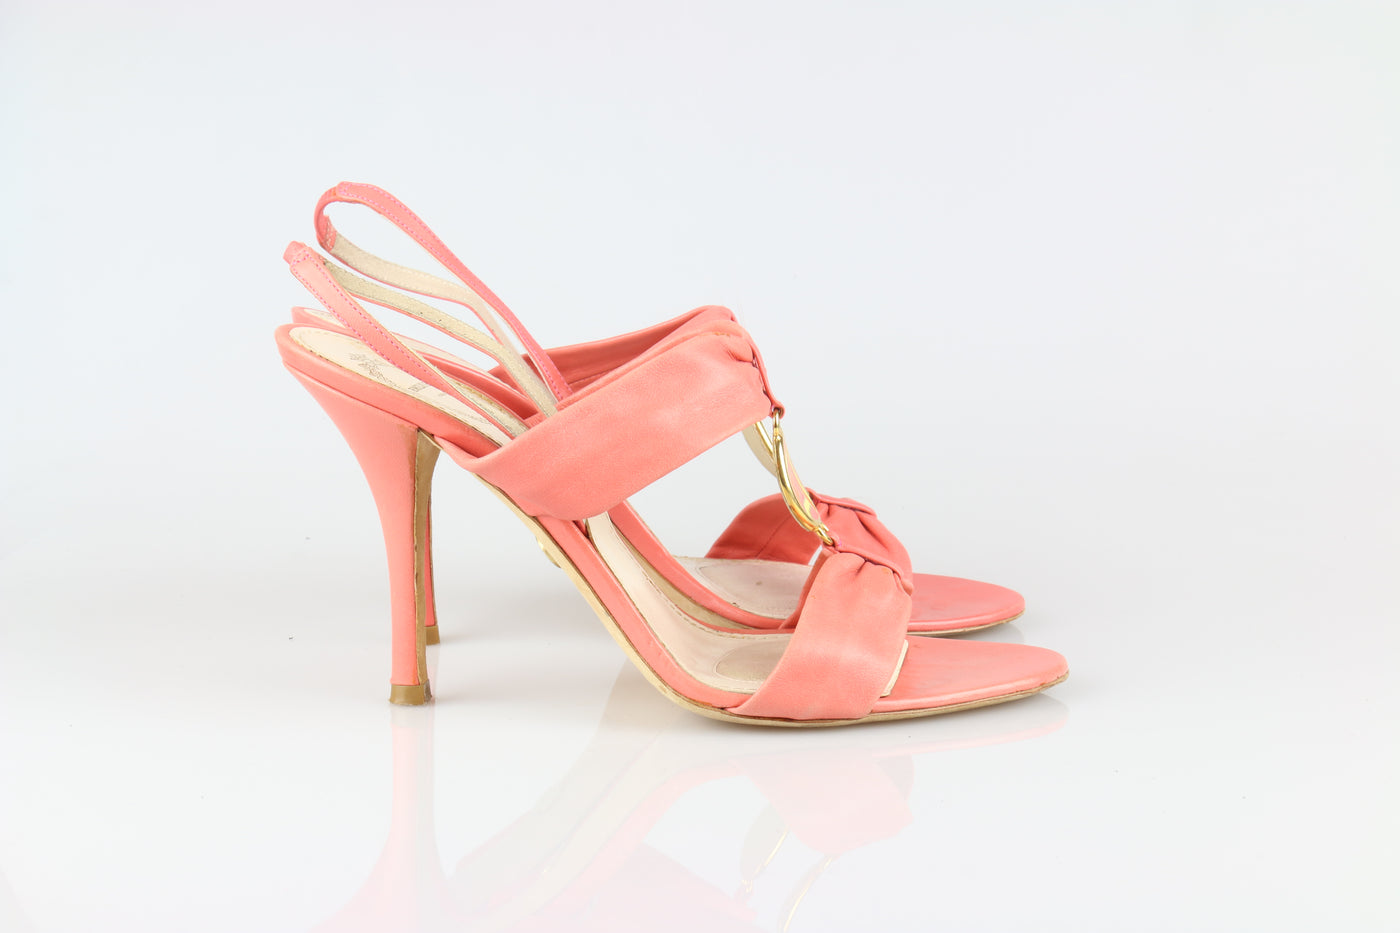 Coral leather sandals